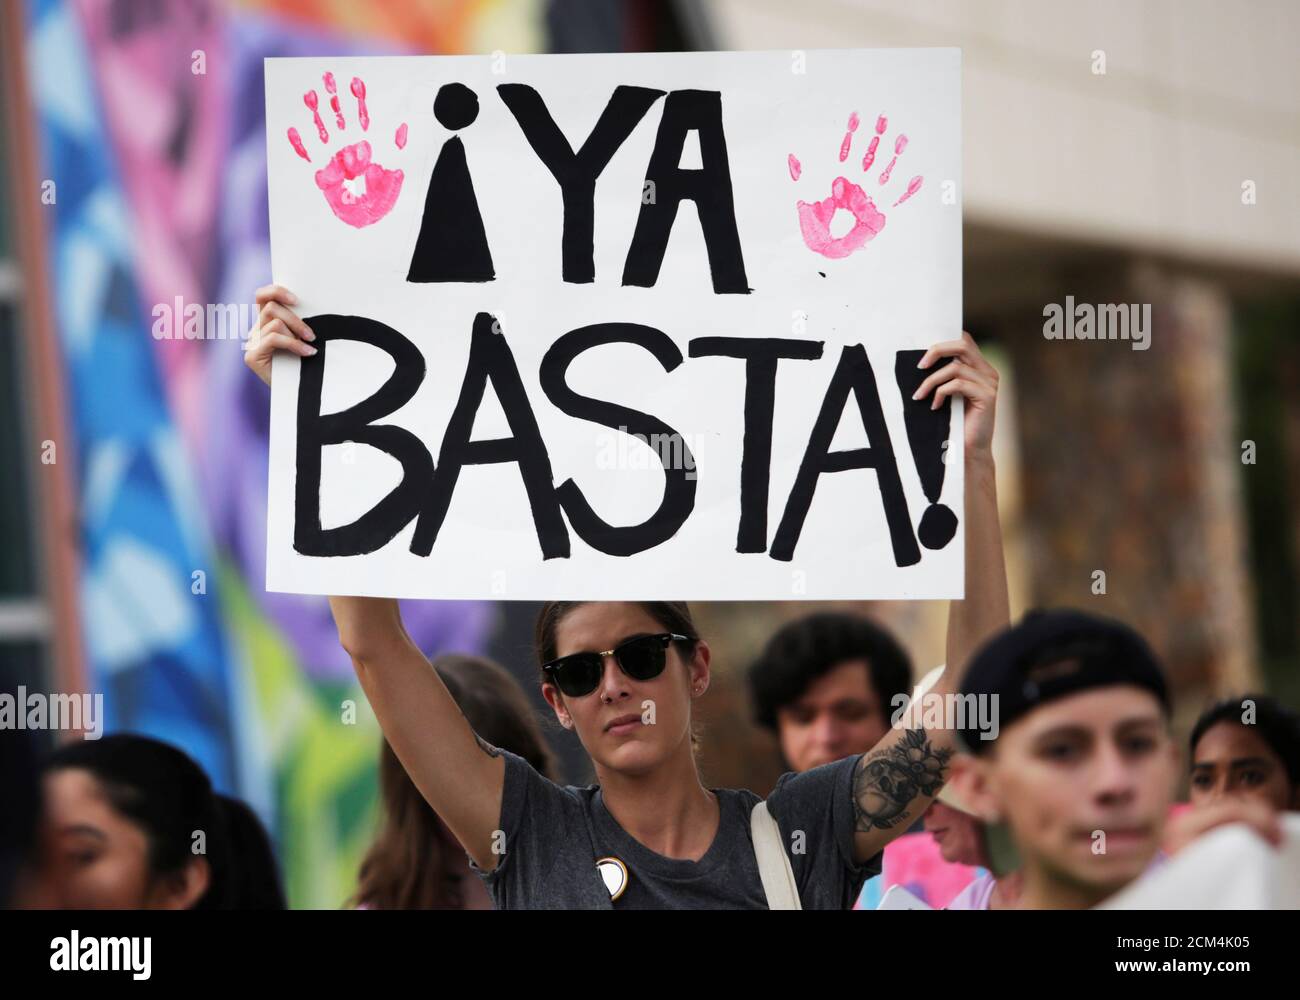 A protester holds a sign during an immigration rights rally at Cleveland Square Park in El Paso, Texas, U.S. July 12, 2019. The sign reads 'It's enough'. REUTERS/Daniel Becerril Stock Photo